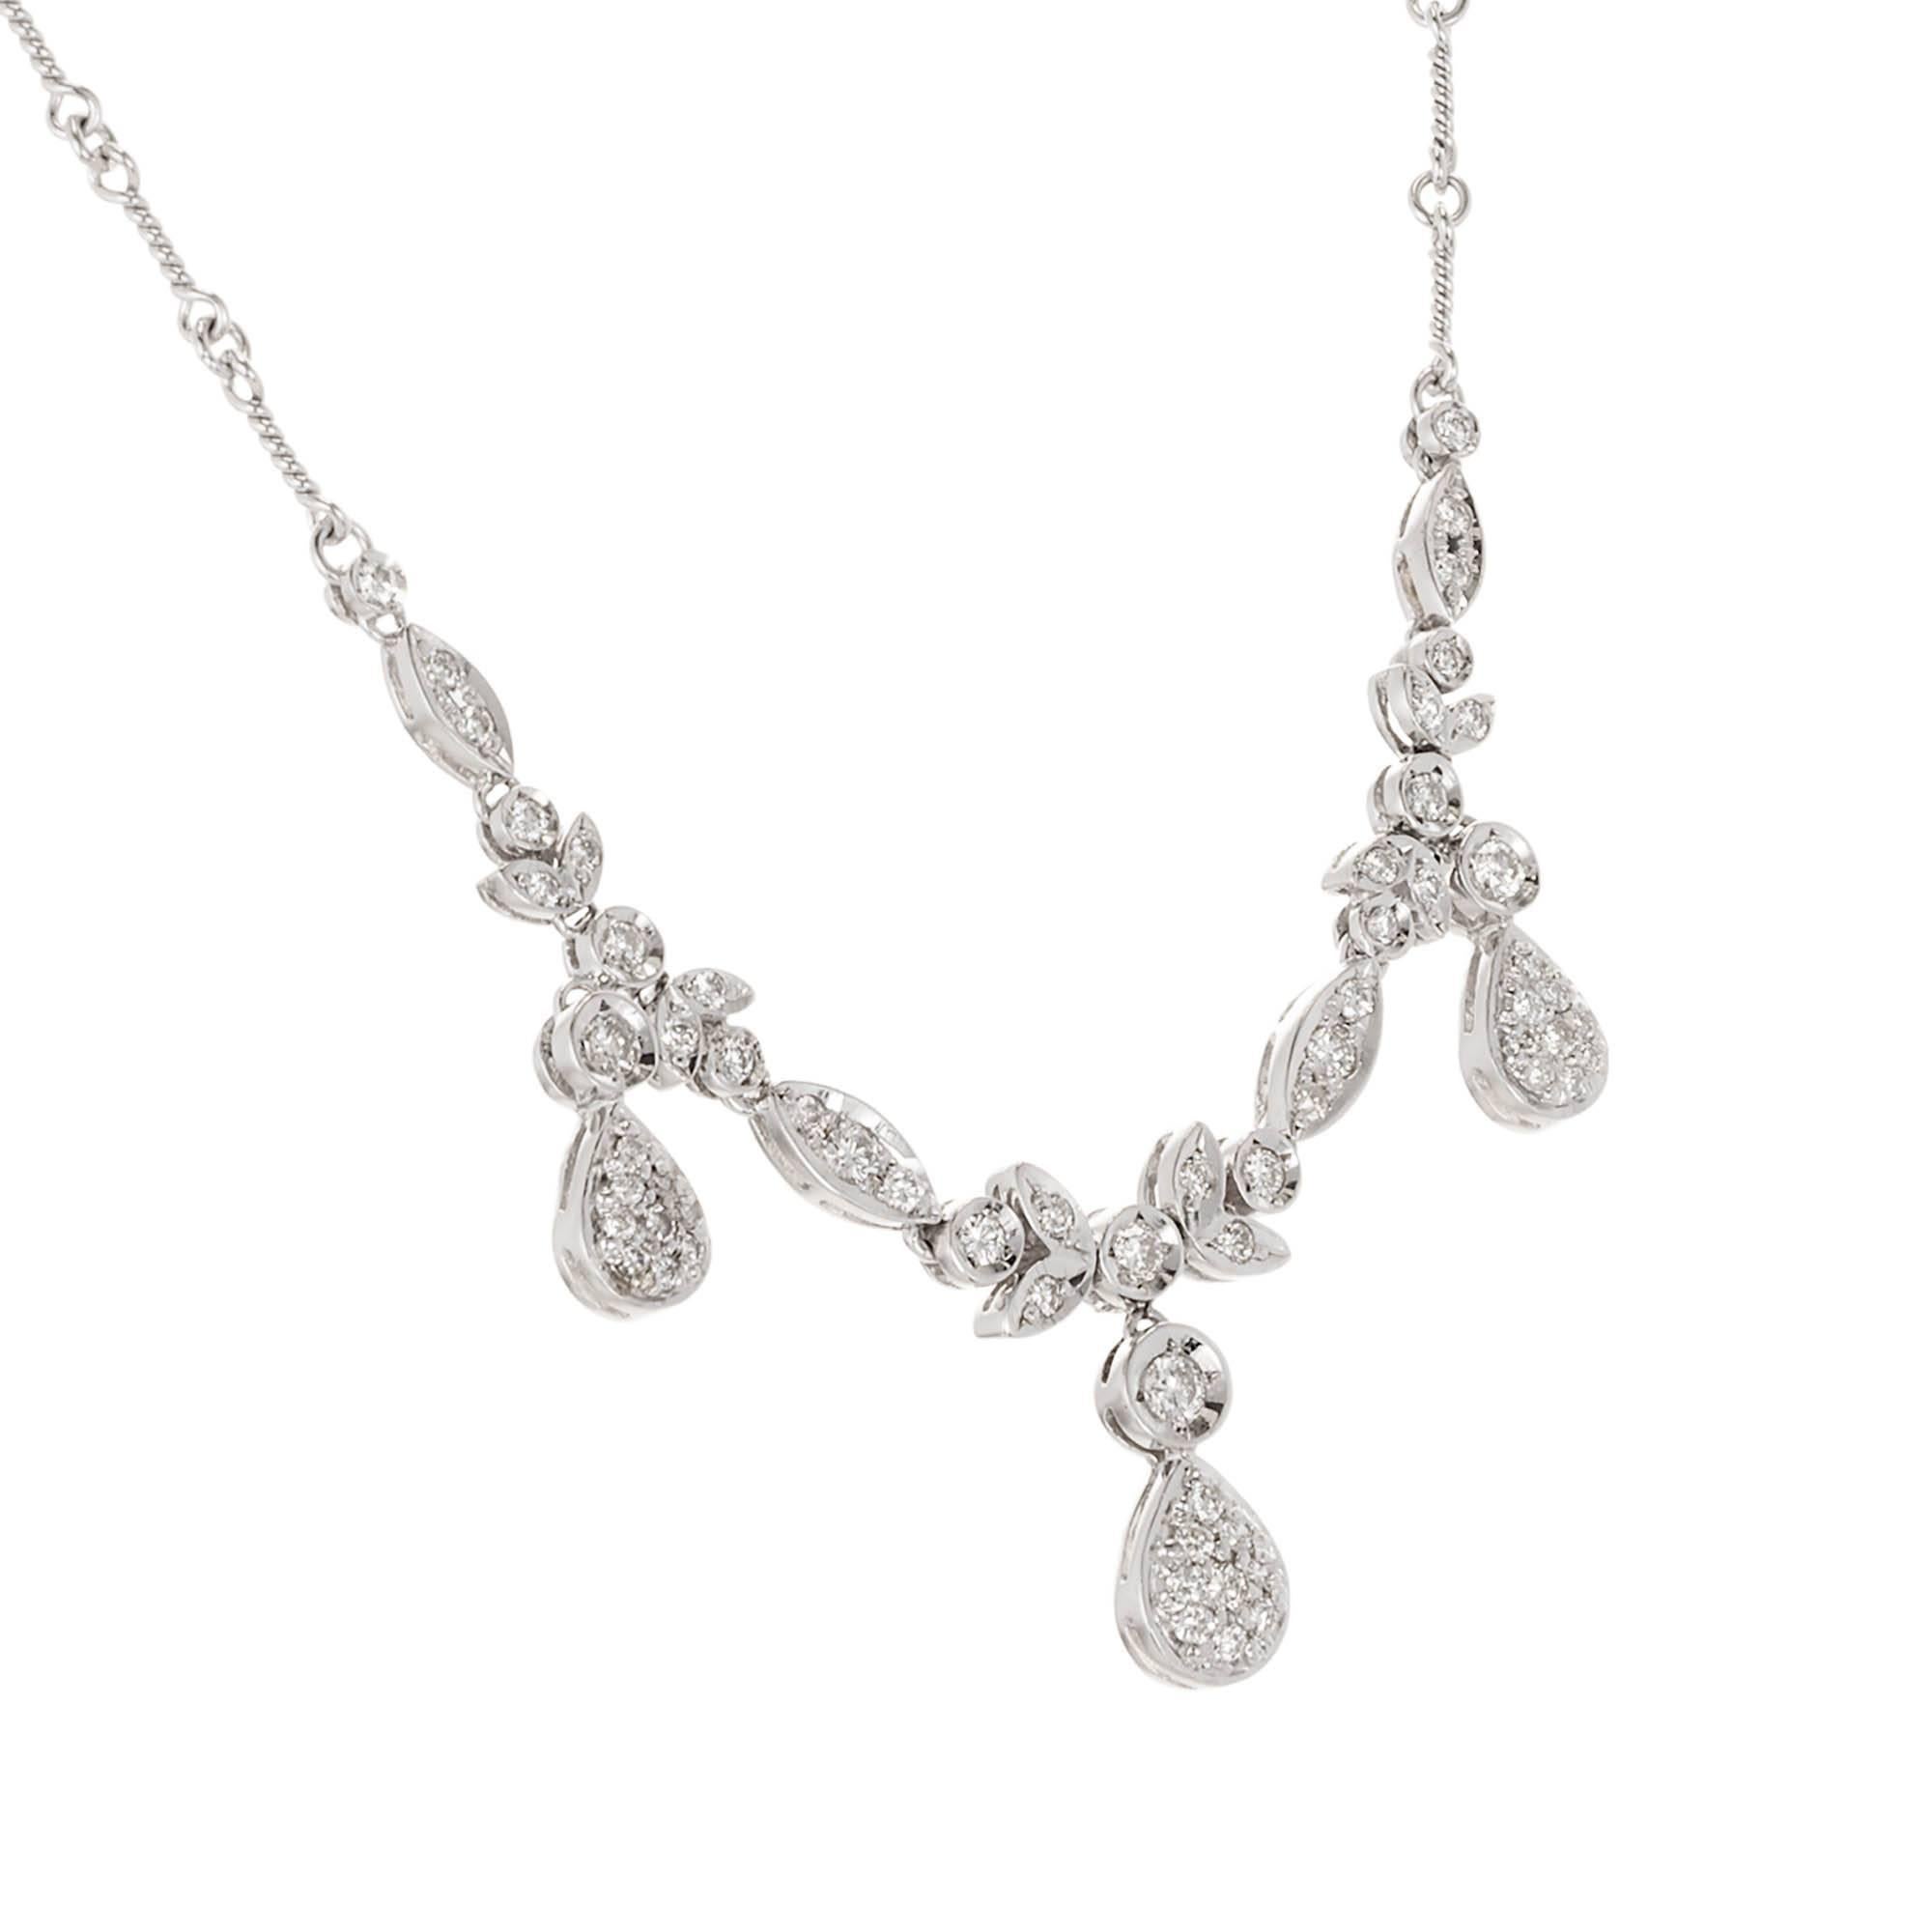 18k white gold and diamond dangle necklace. A coil and link design chain are adorned with a diamond design center. Diamond set petals and marquise shaped links have three separate dangling diamond pave set tear drops hanging with matching sides and